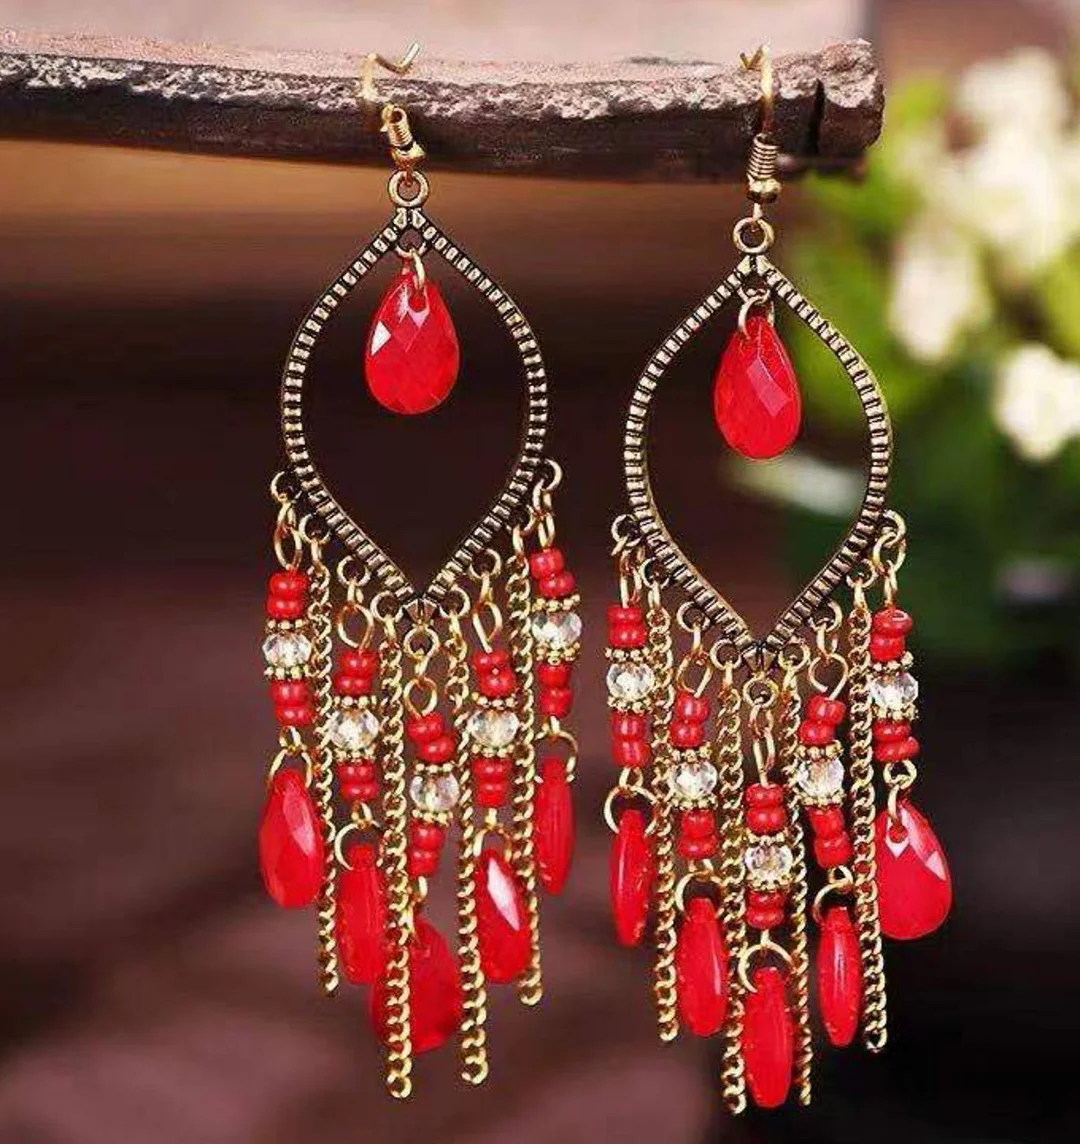 Retro water drops round beads all-match earrings